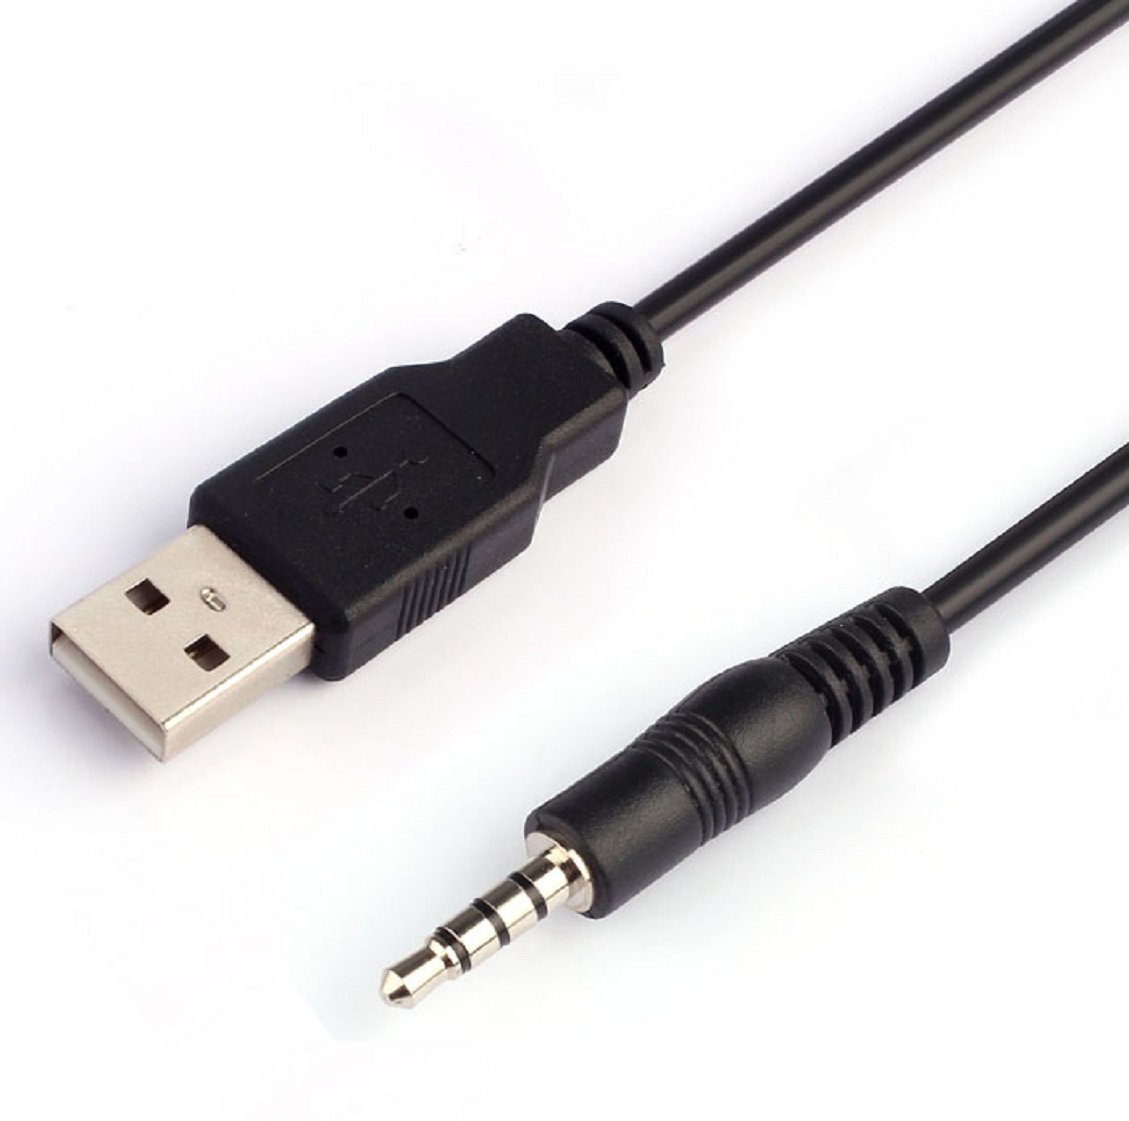 STREAM MP3 Player USB Charging Cable - H2O